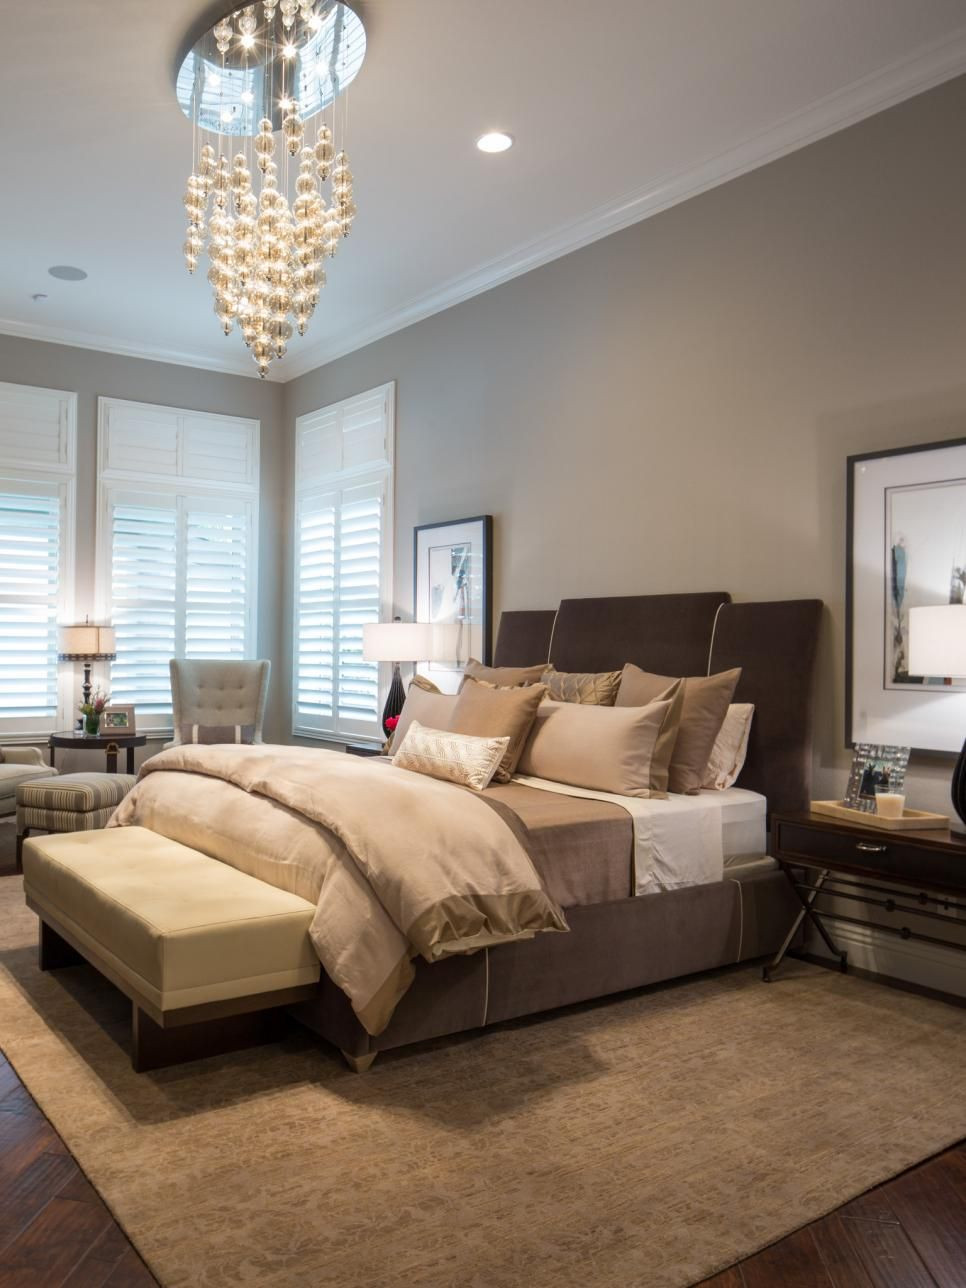 Light Brown Bedroom
 Jonathan Scott s bedroom features a mix of browns taupes